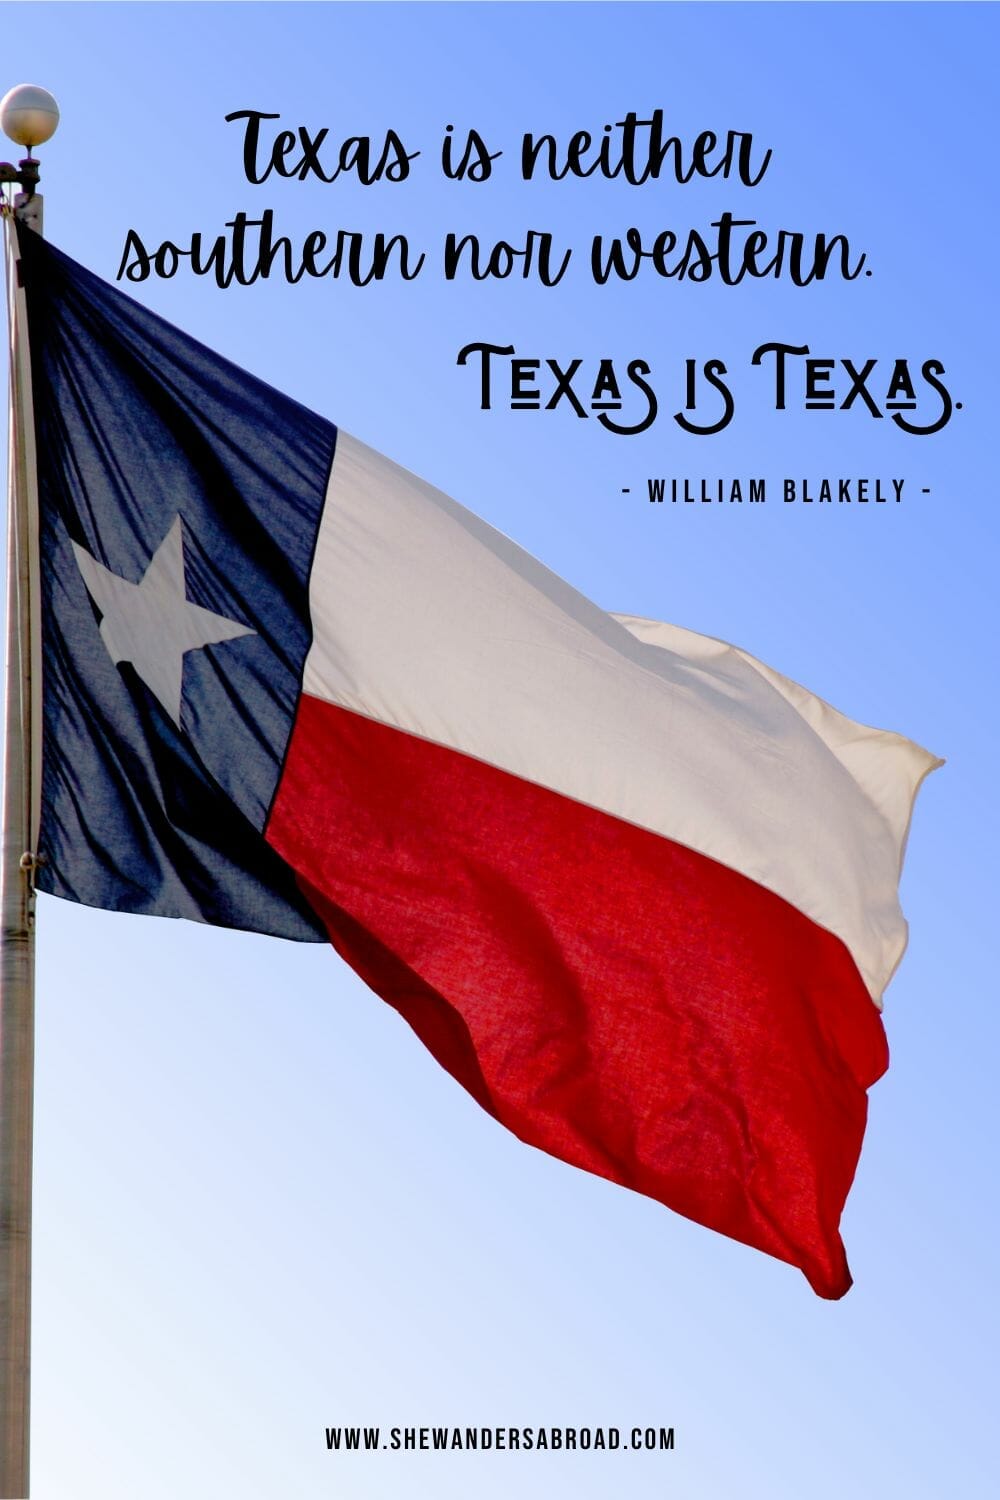 Short Texas Quotes for Instagram